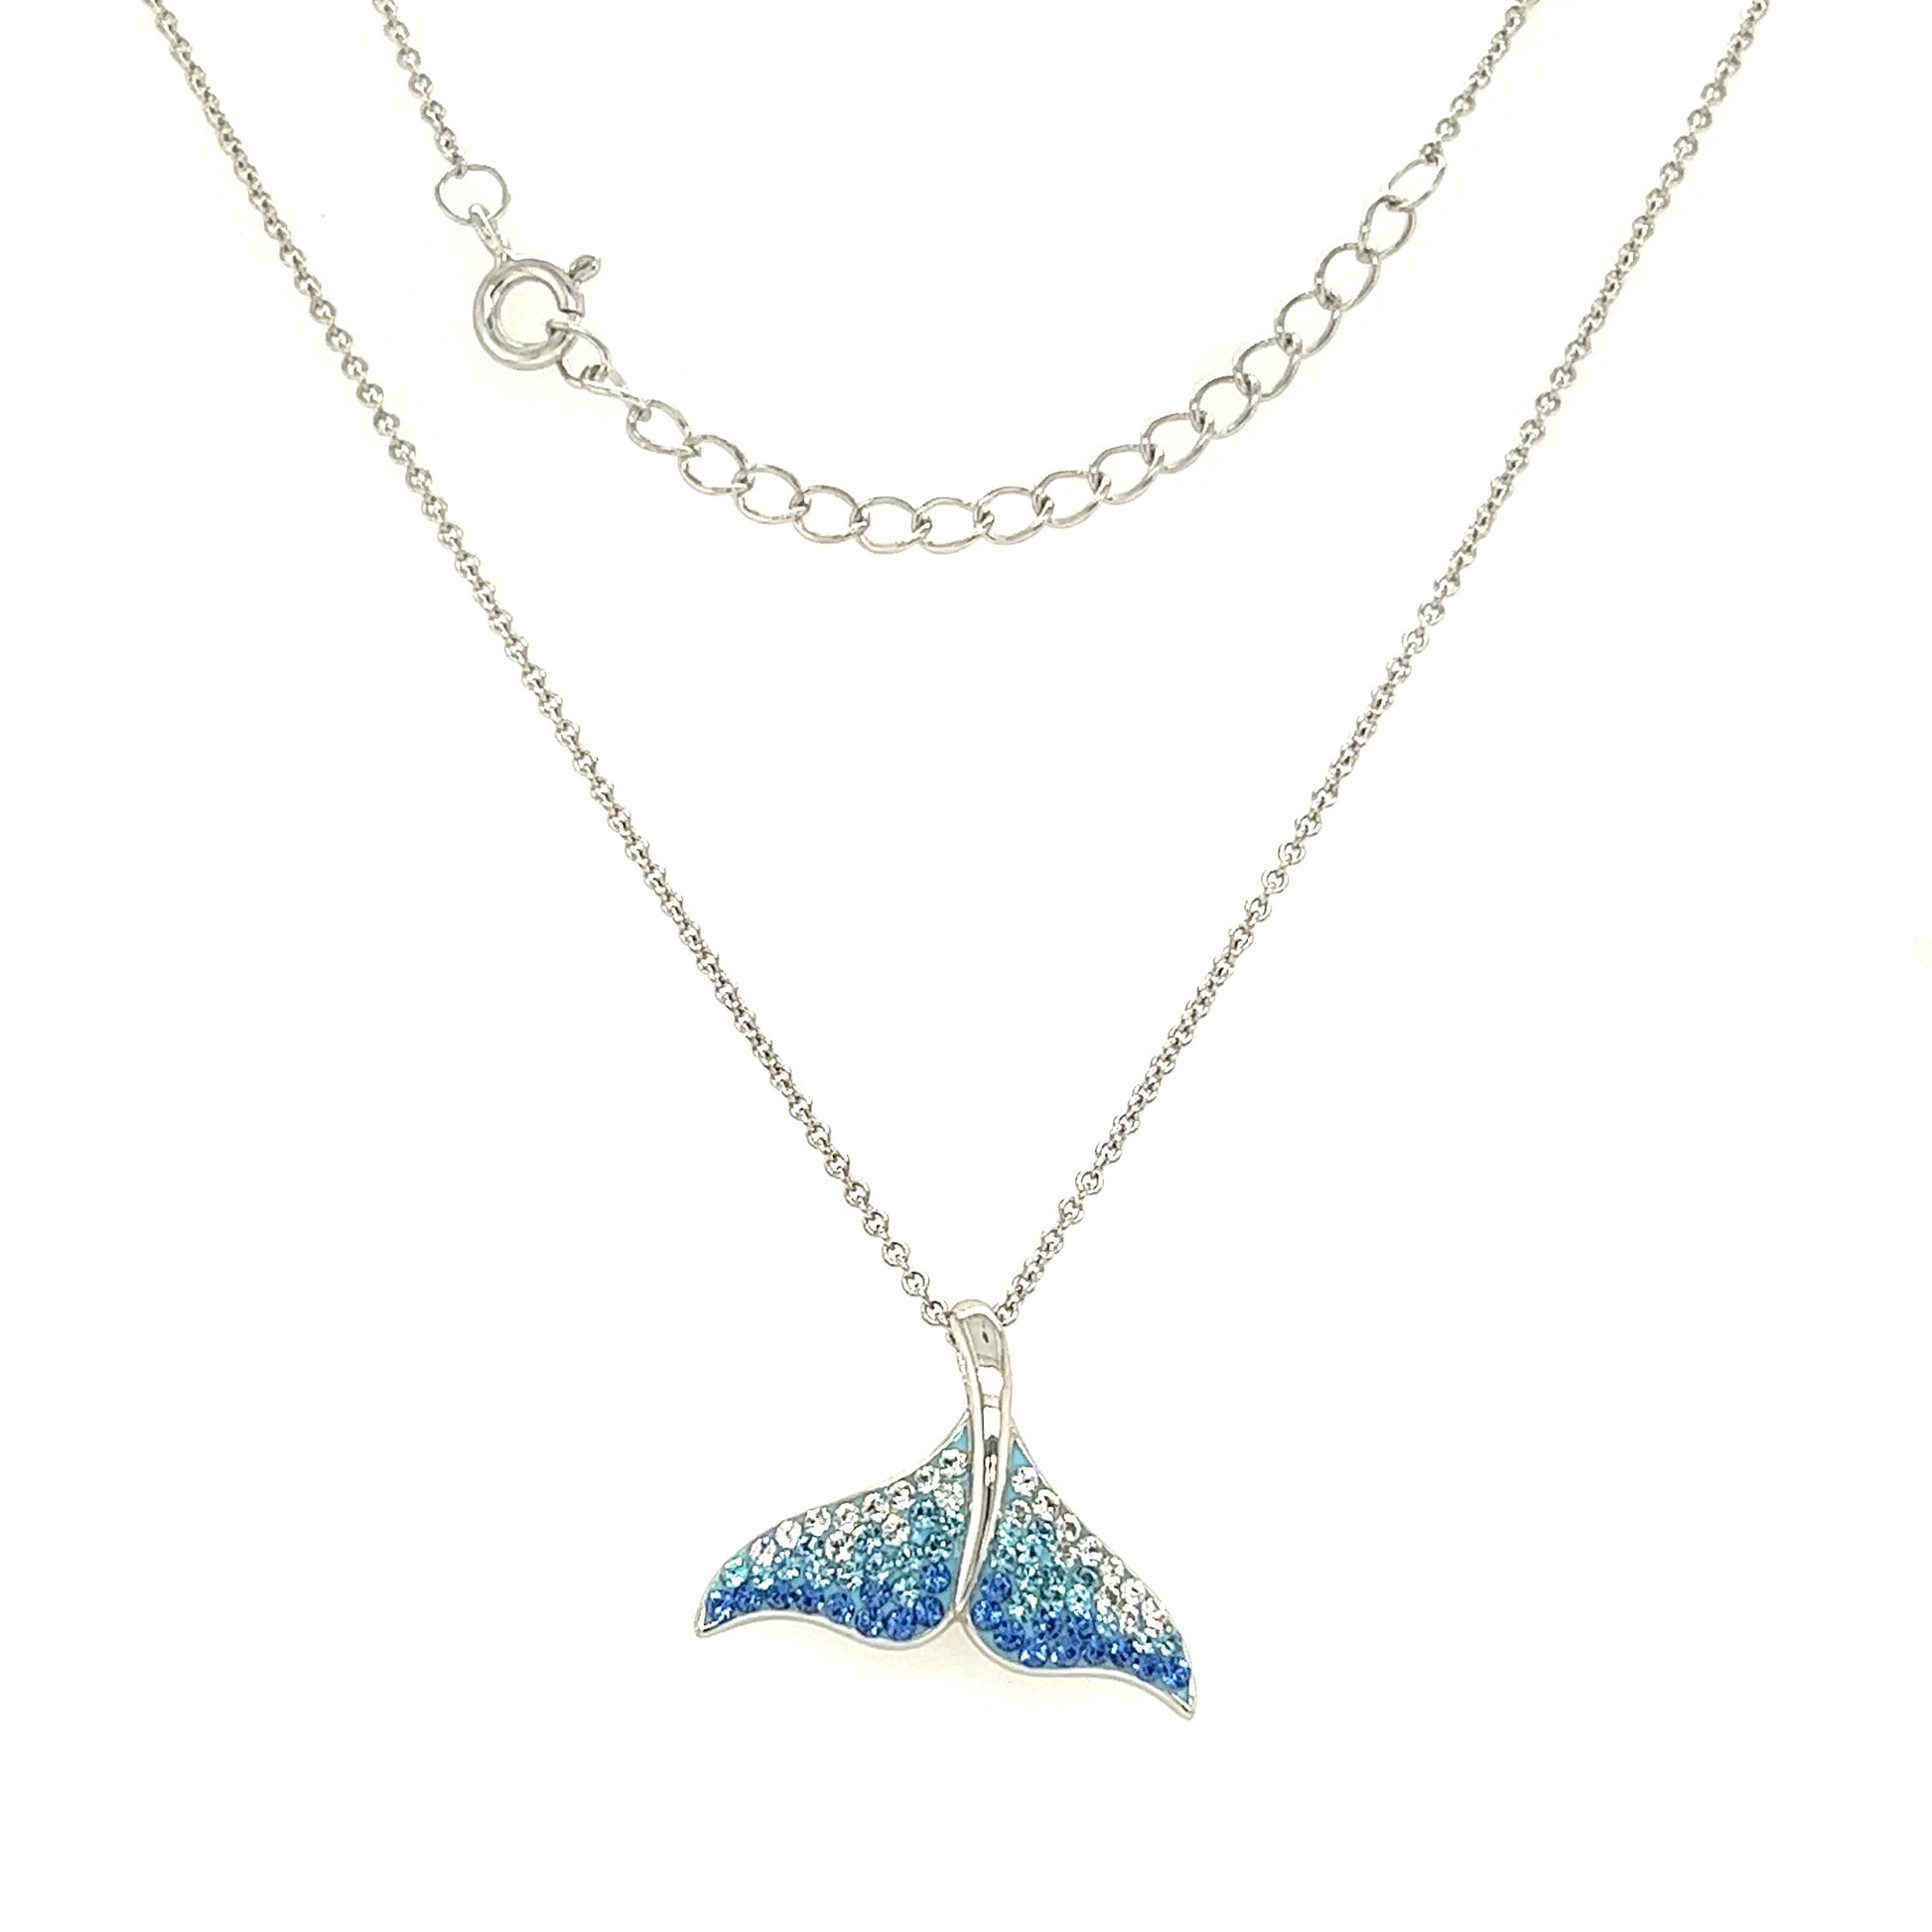 Whale Tail Necklace with White, Aqua and Blue Crystals in Sterling Silver Full Necklace Front View